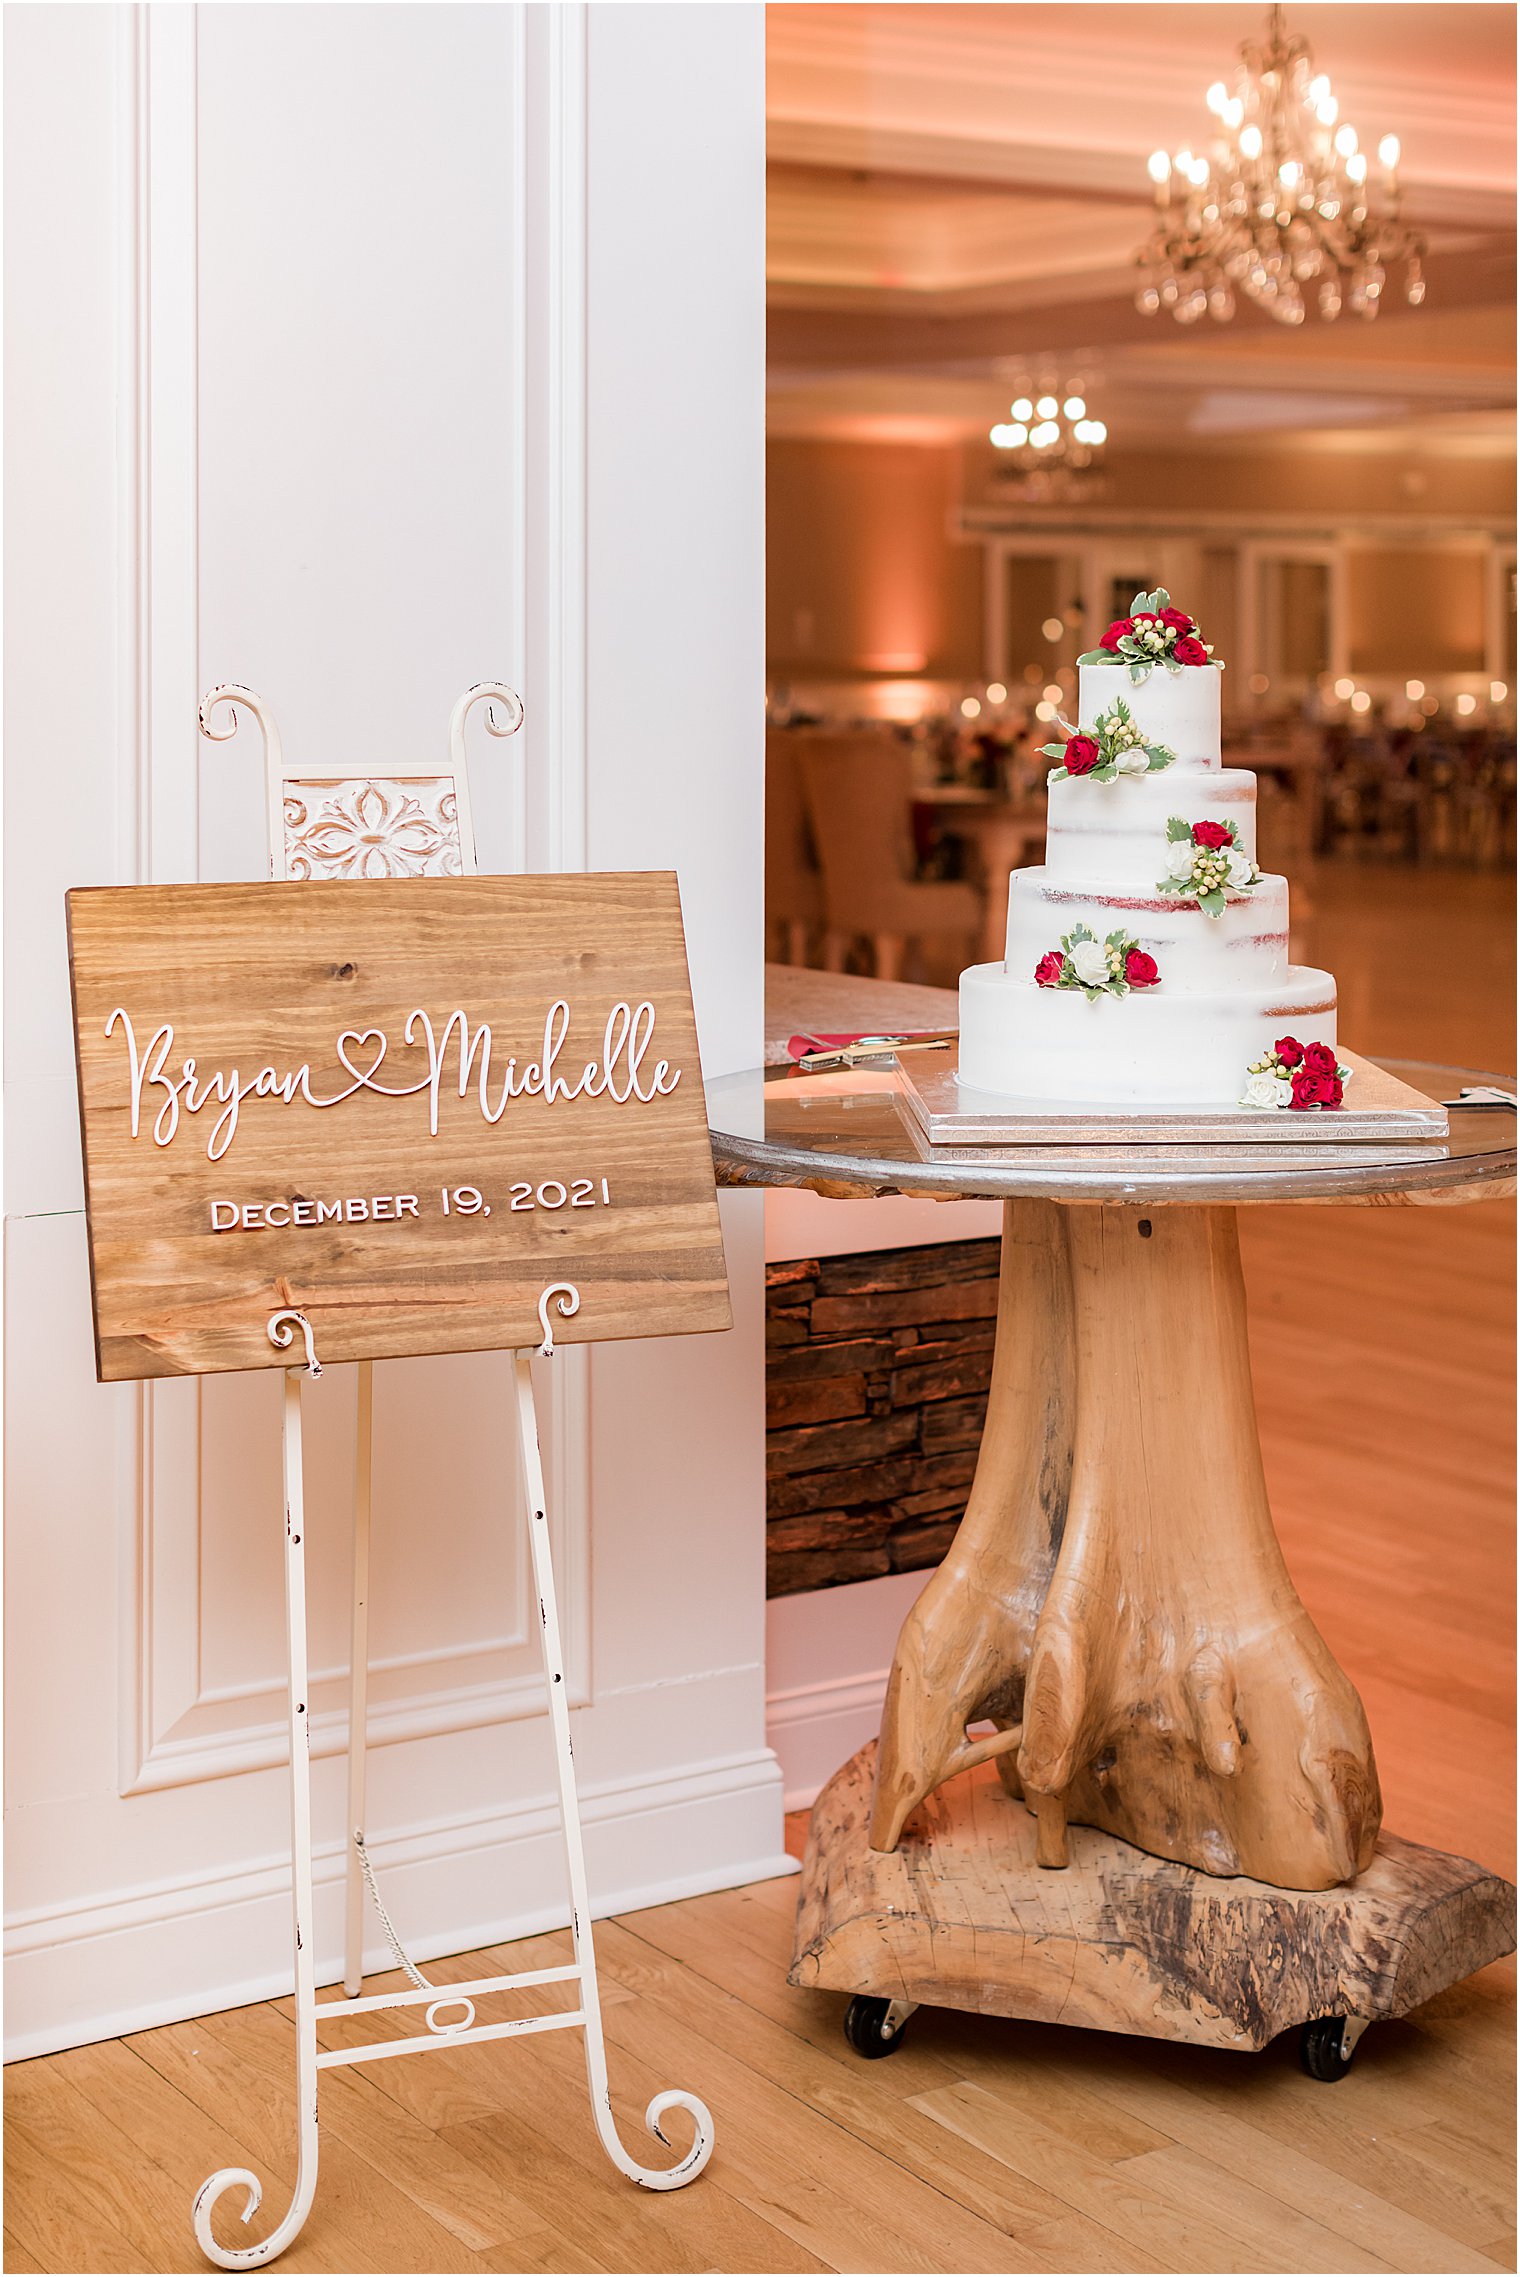 wedding sits on cake table made out of log for rustic wedding reception in New Jersey